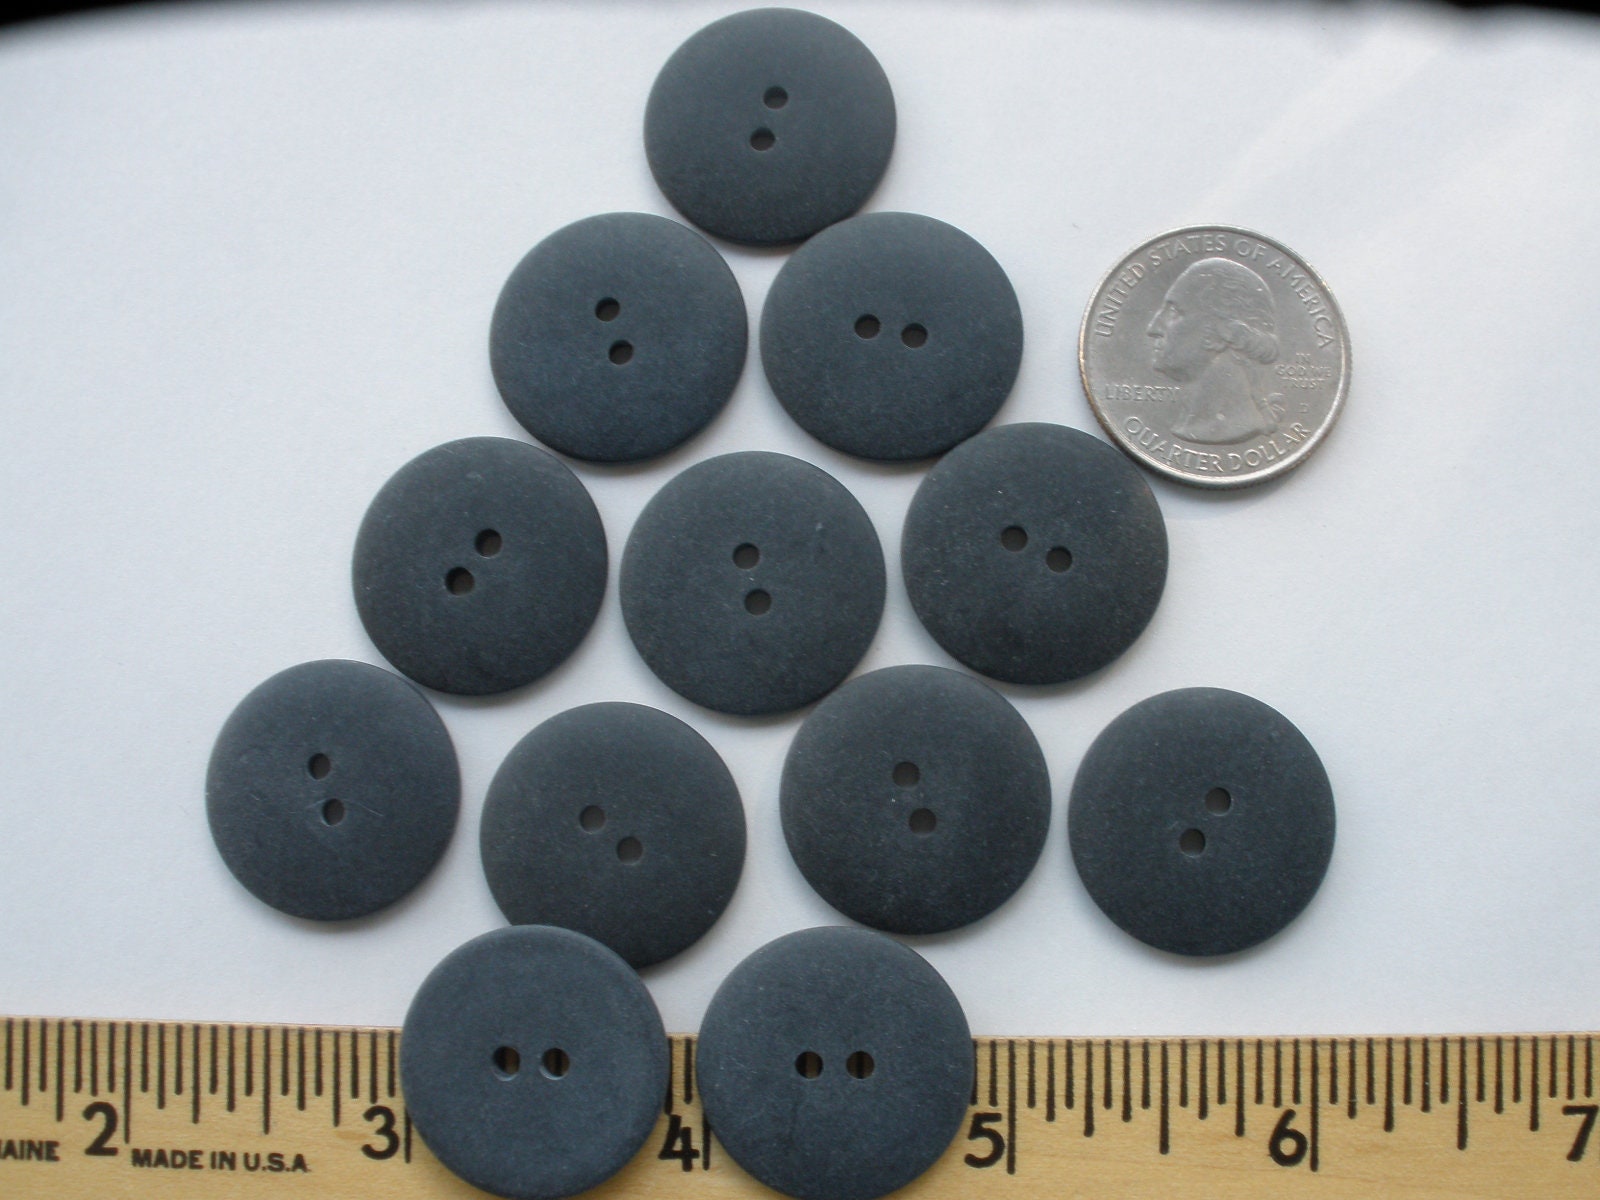 Sewing Button 144pcs 22mm Black/COF/White Jade Pattern Coat Buttons for  Women/Men Clothing high Sewing Button - (Color: Black)